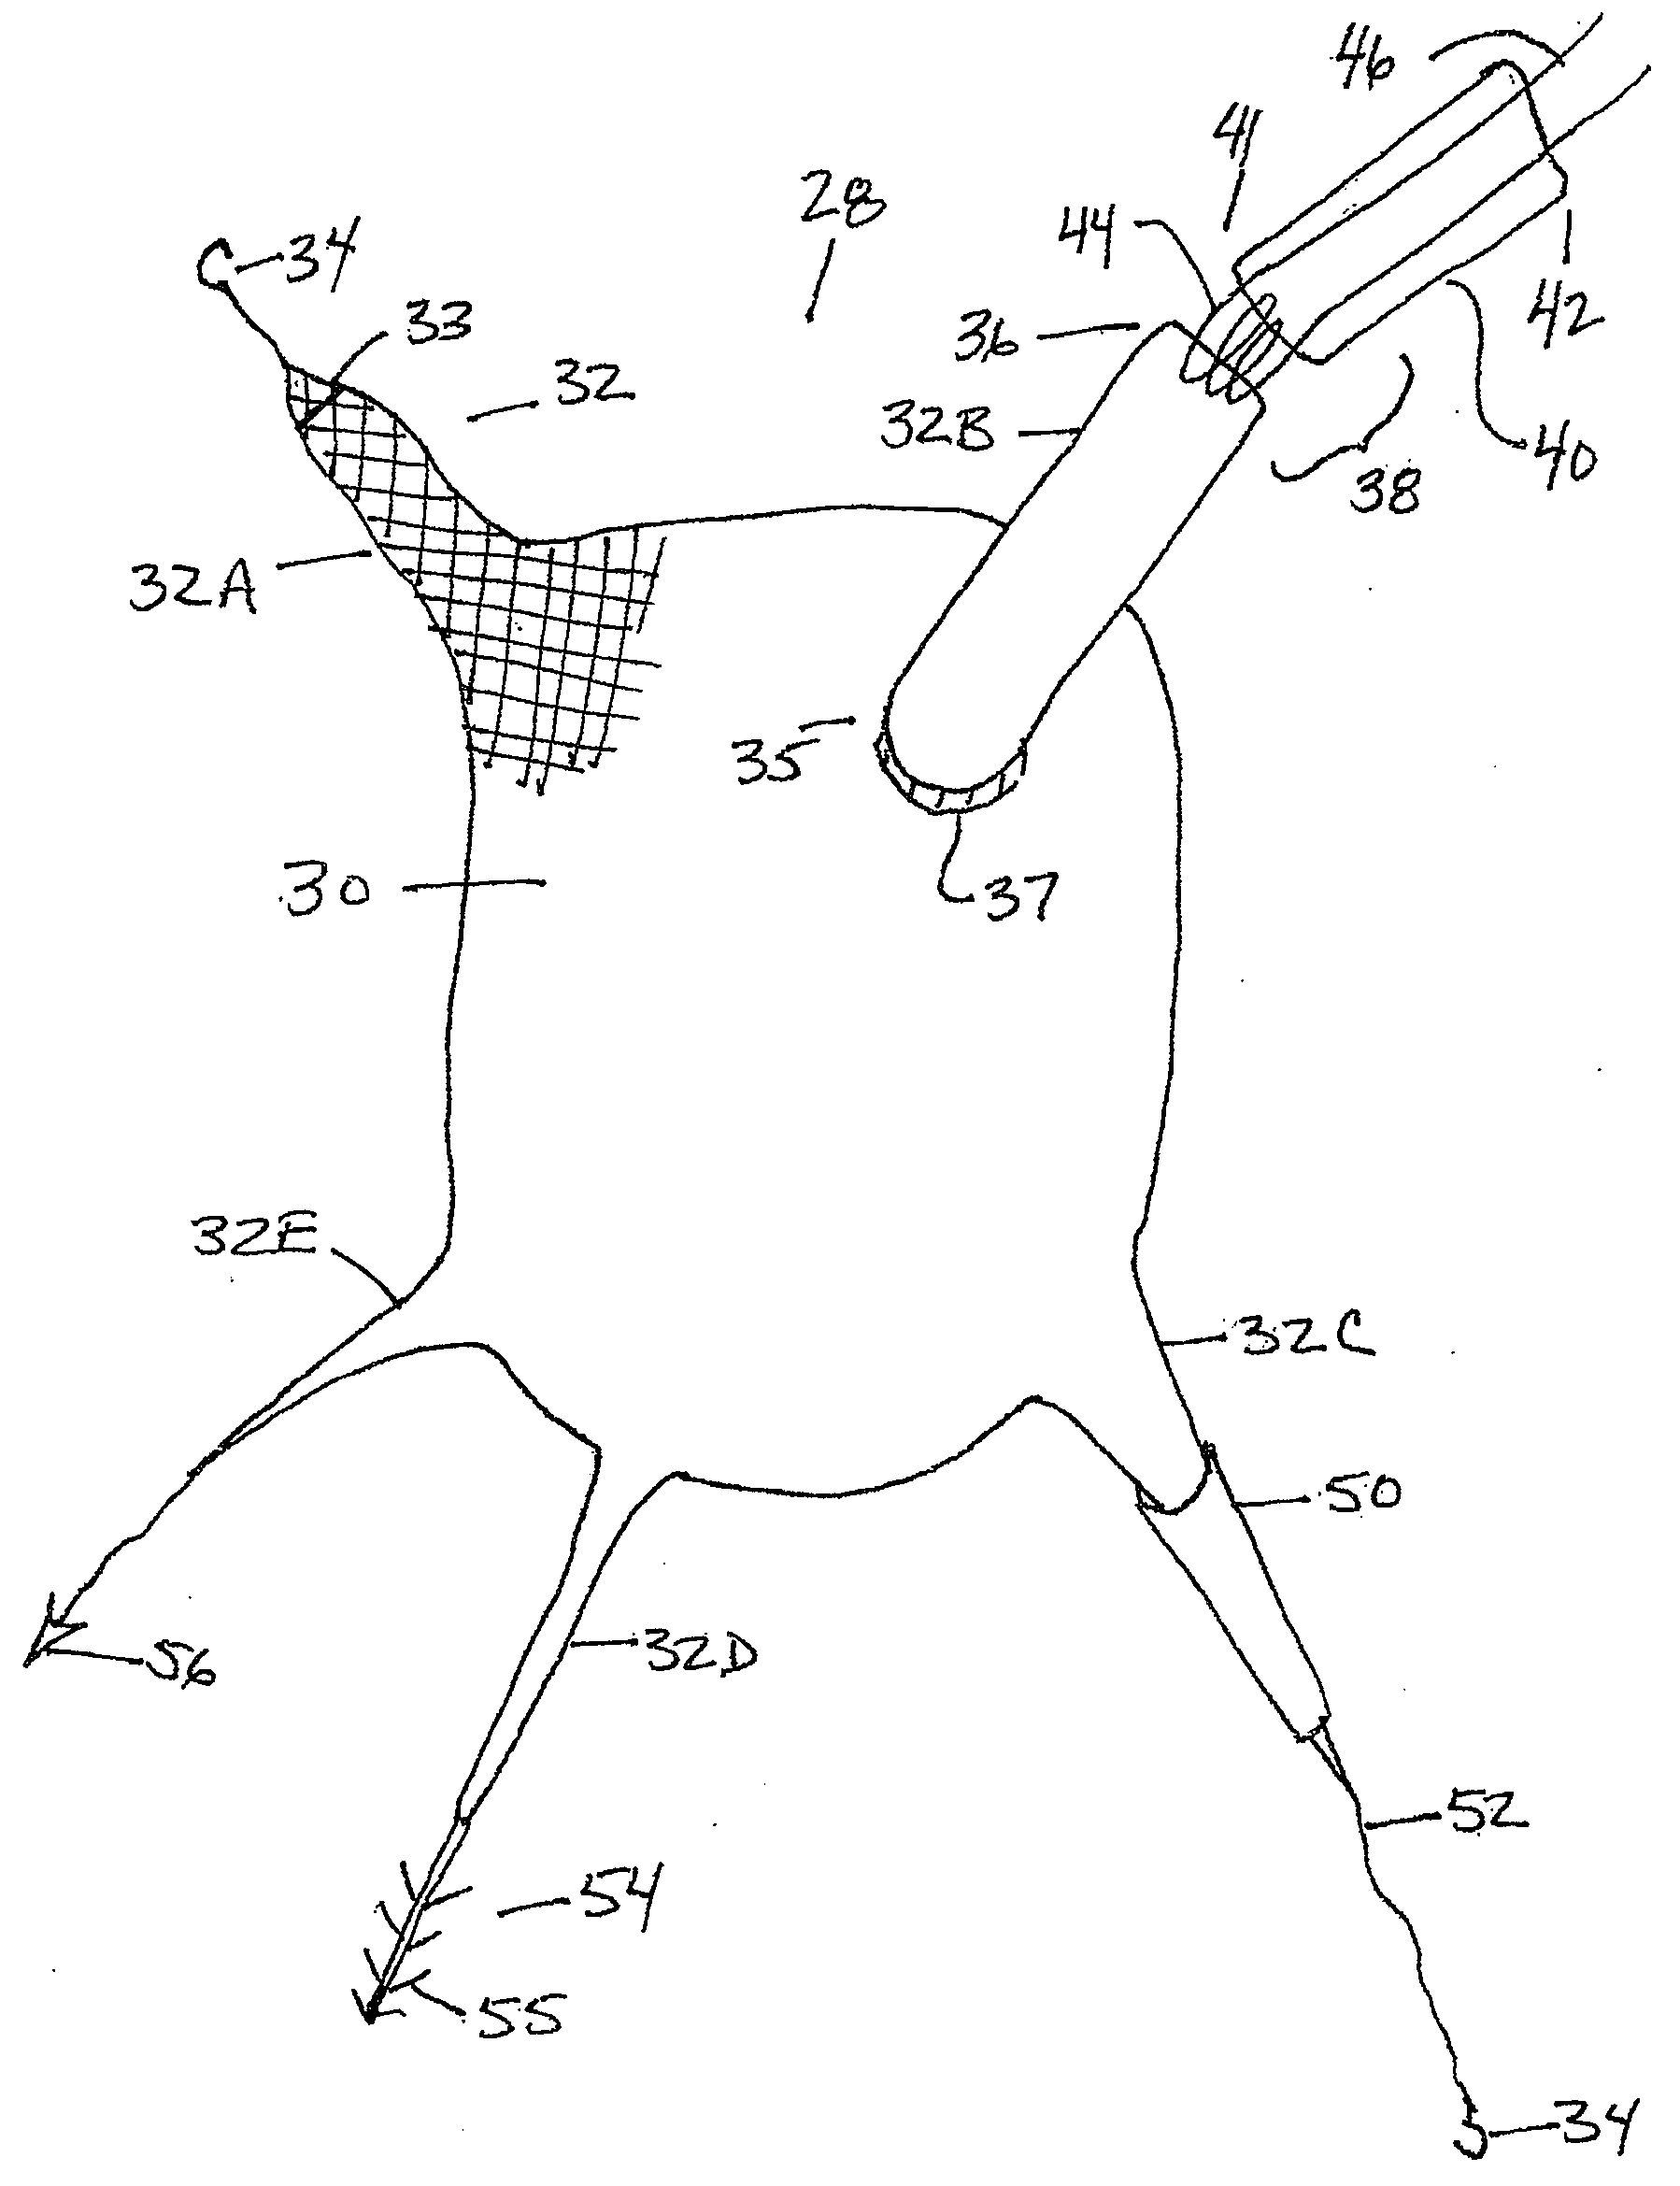 Methods and Apparatus for Treating Pelvic Floor Prolapse